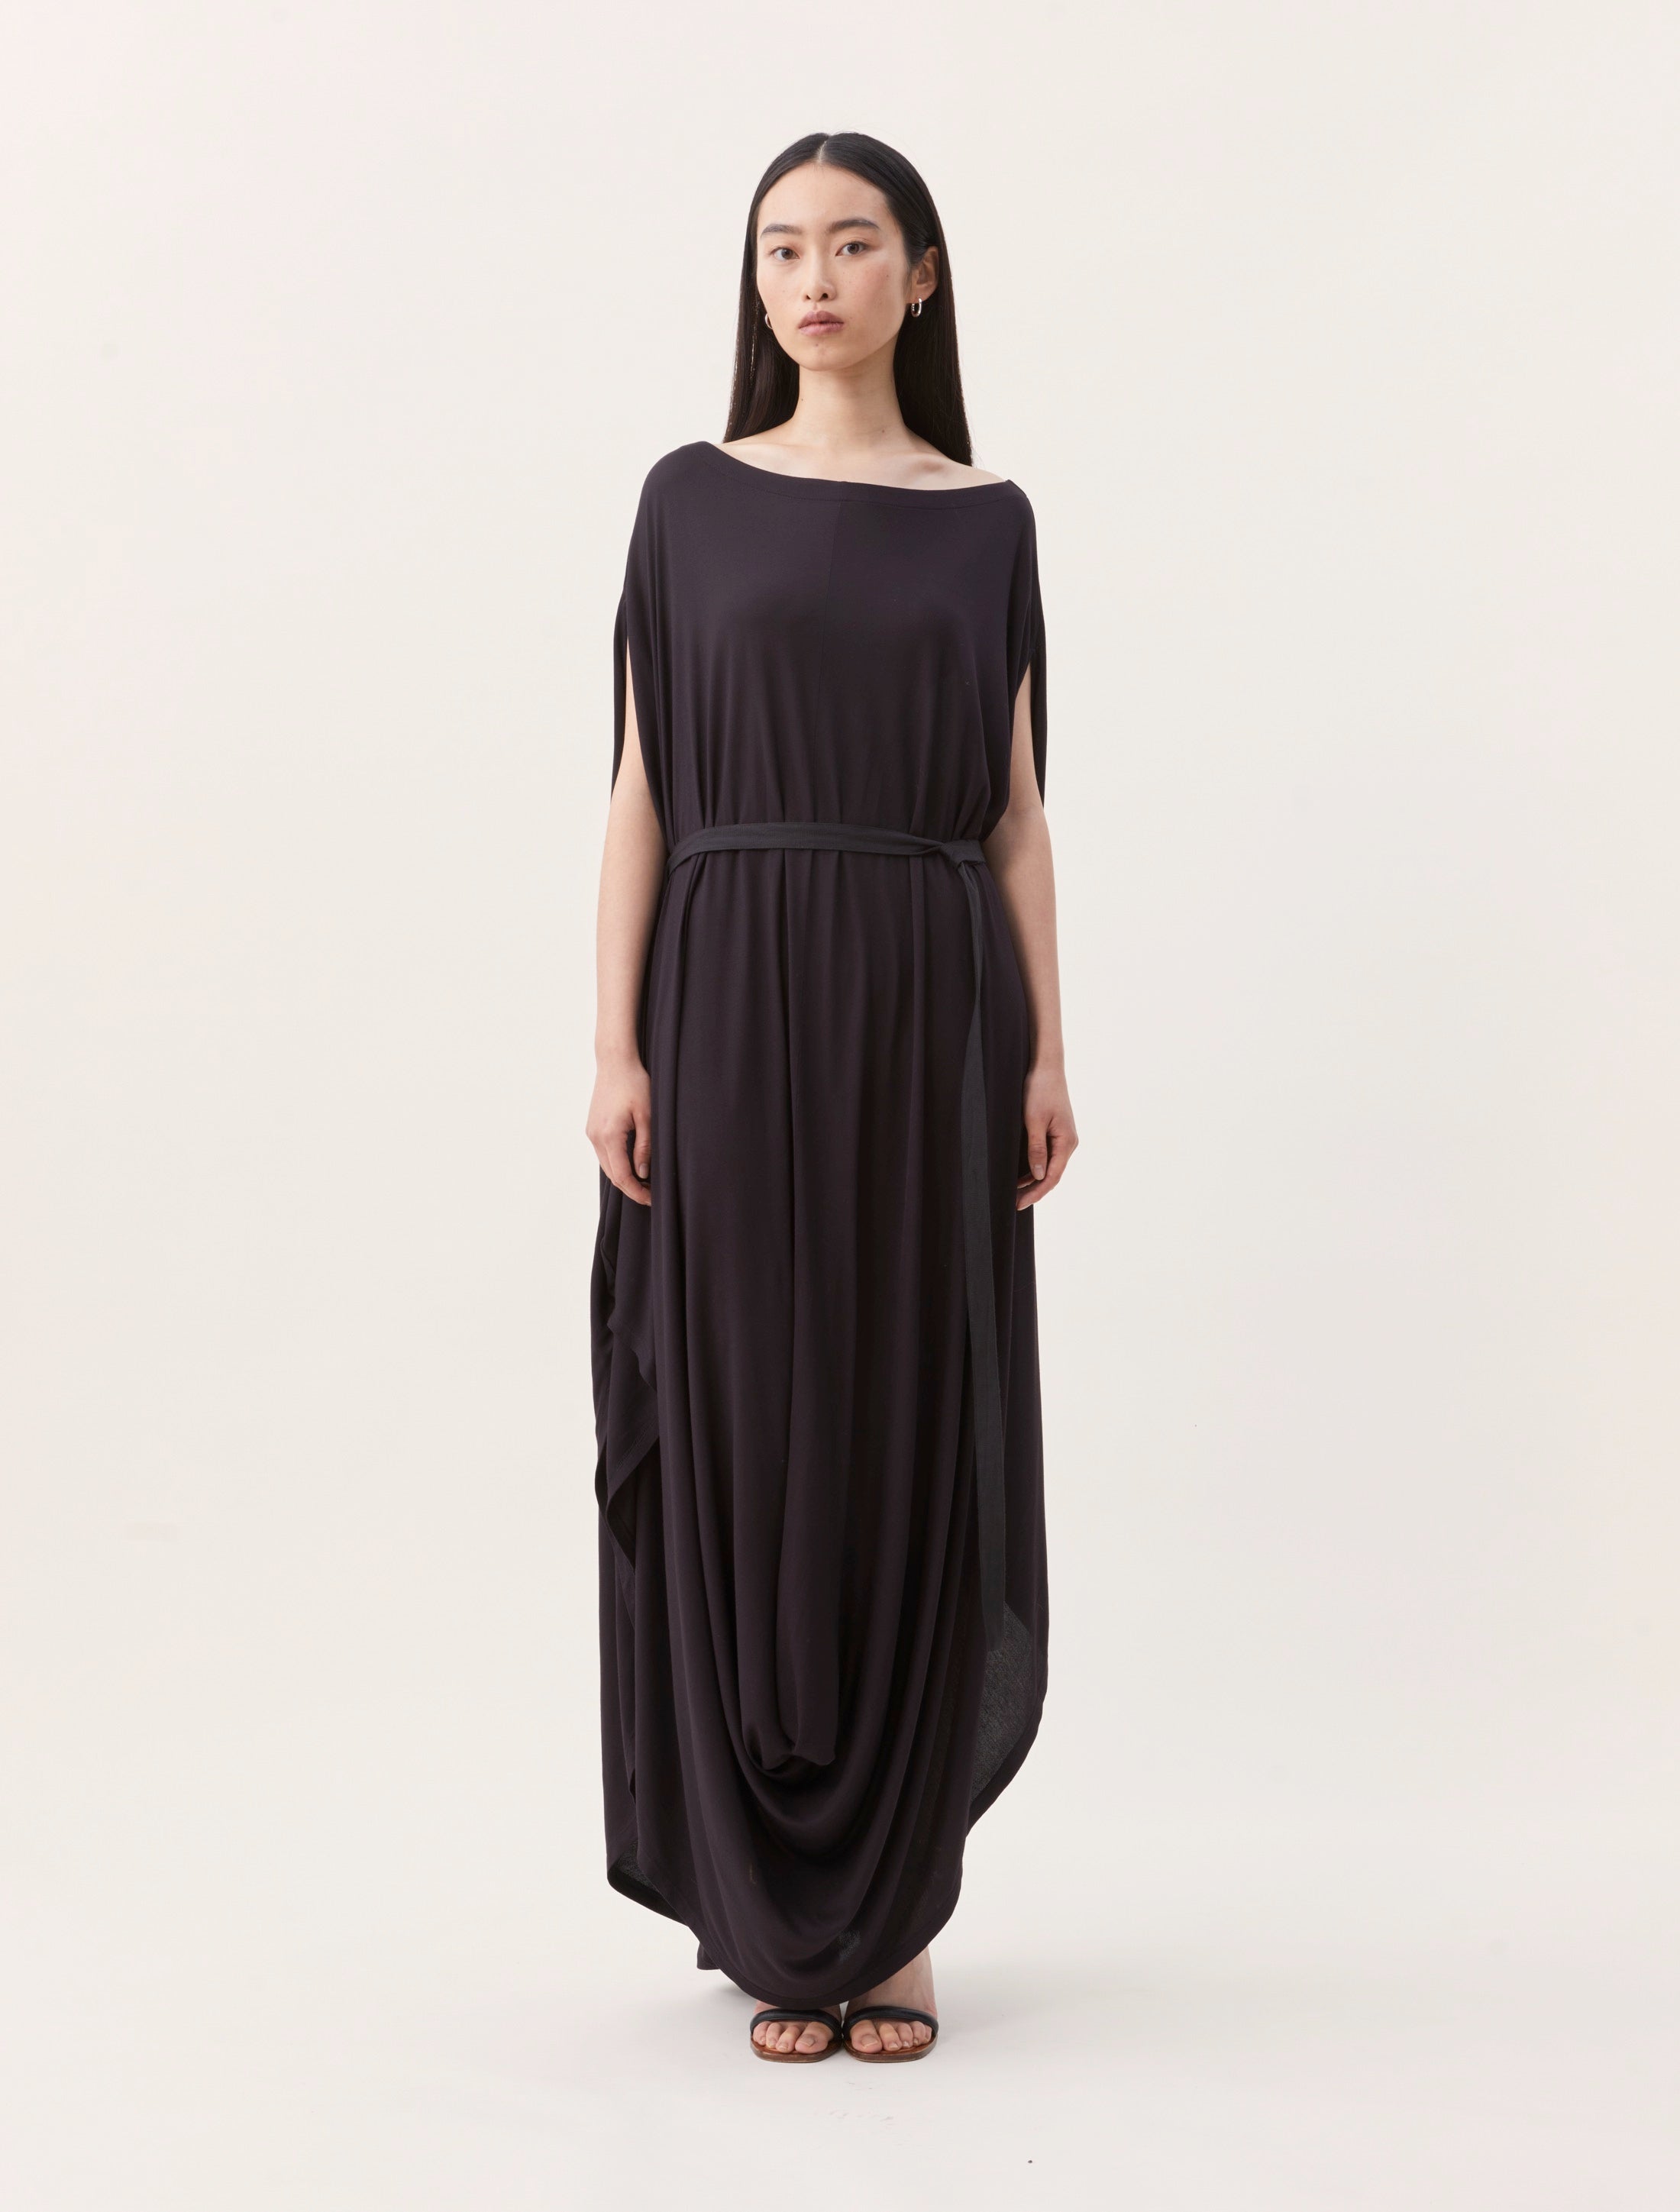 Ninety Percent Ares Dress in Obsidian